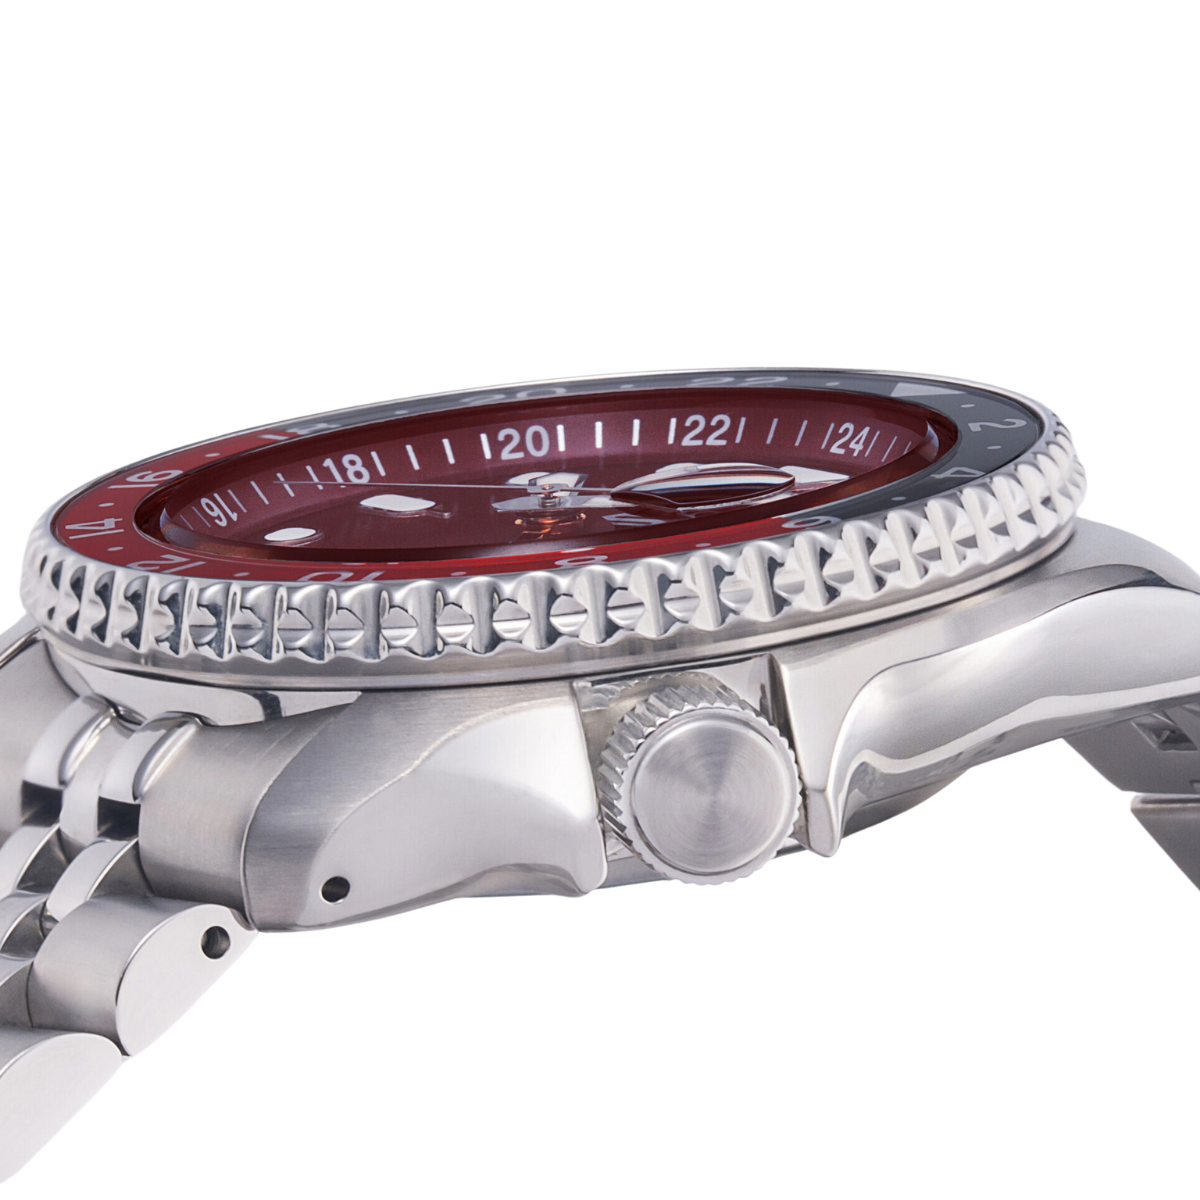 SEIKO 5 Sports GMT Thong Sia Exclusive Limited edition Passion Red SSK031 SSK031K SSK031K1